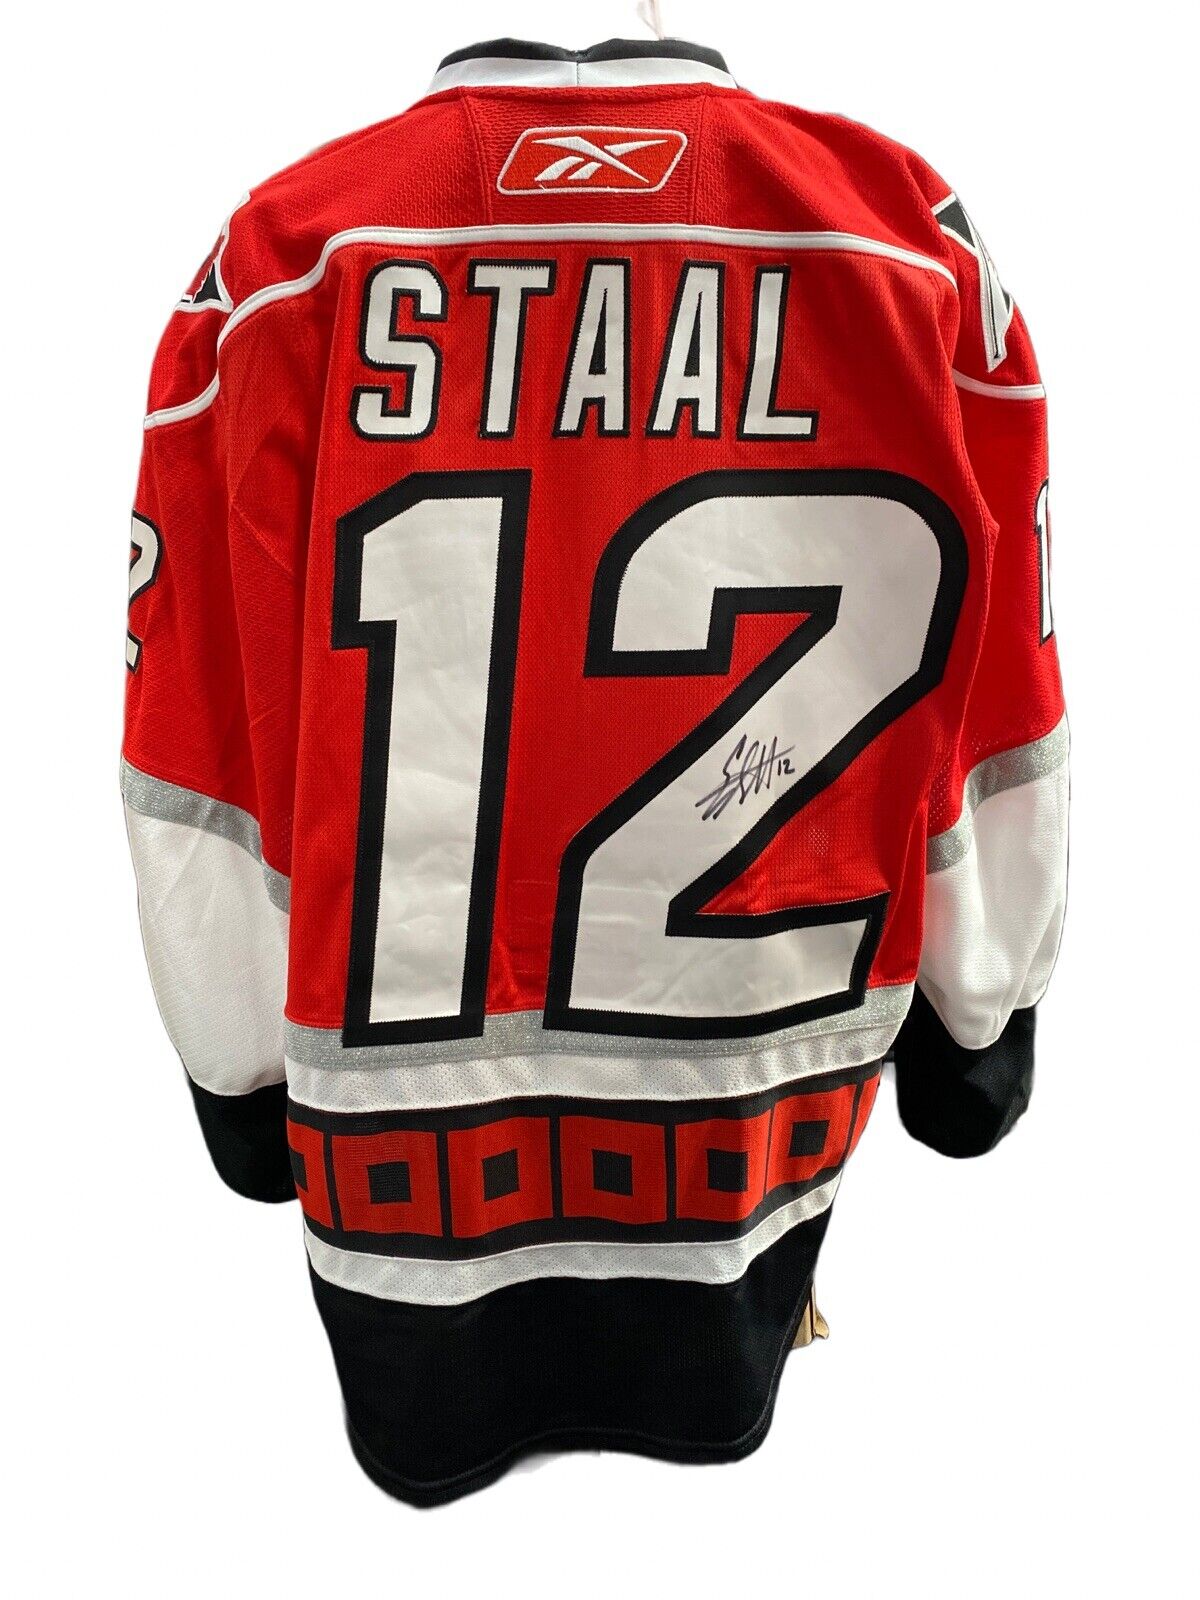 Eric Staal NHL Memorabilia, Eric Staal Collectibles, Verified